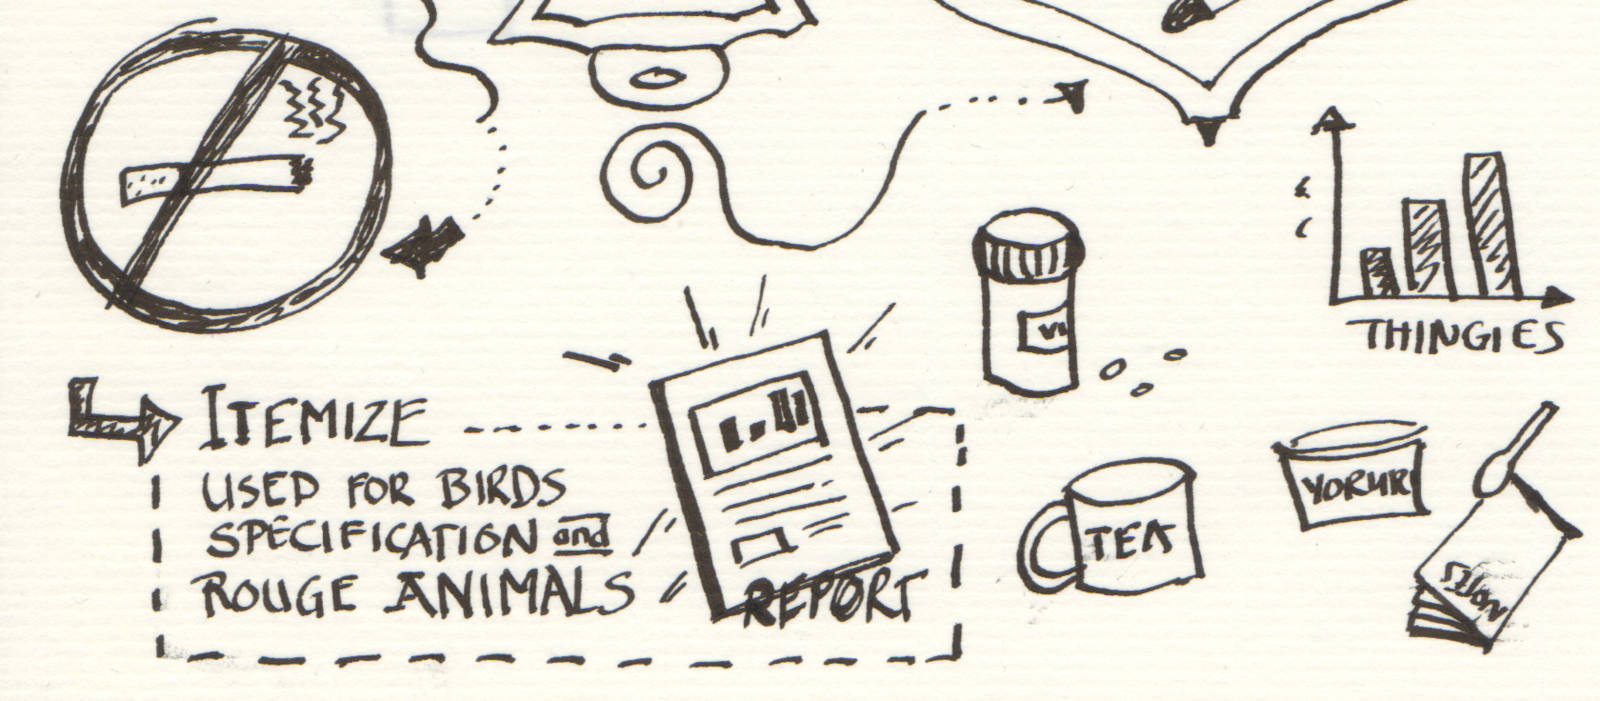 Ink drawing of items a person might have on a chaotic desk. A no smoking sign, a mug of tea, a yorur (not yogurt) jar, a notebook with a spoon on it, a bar chart labeled only THINGIES, a report that says Itemize-Used for bird specifications and rouge[sic] animals, a bottle of pills with some lying next to it. Own work 2023.